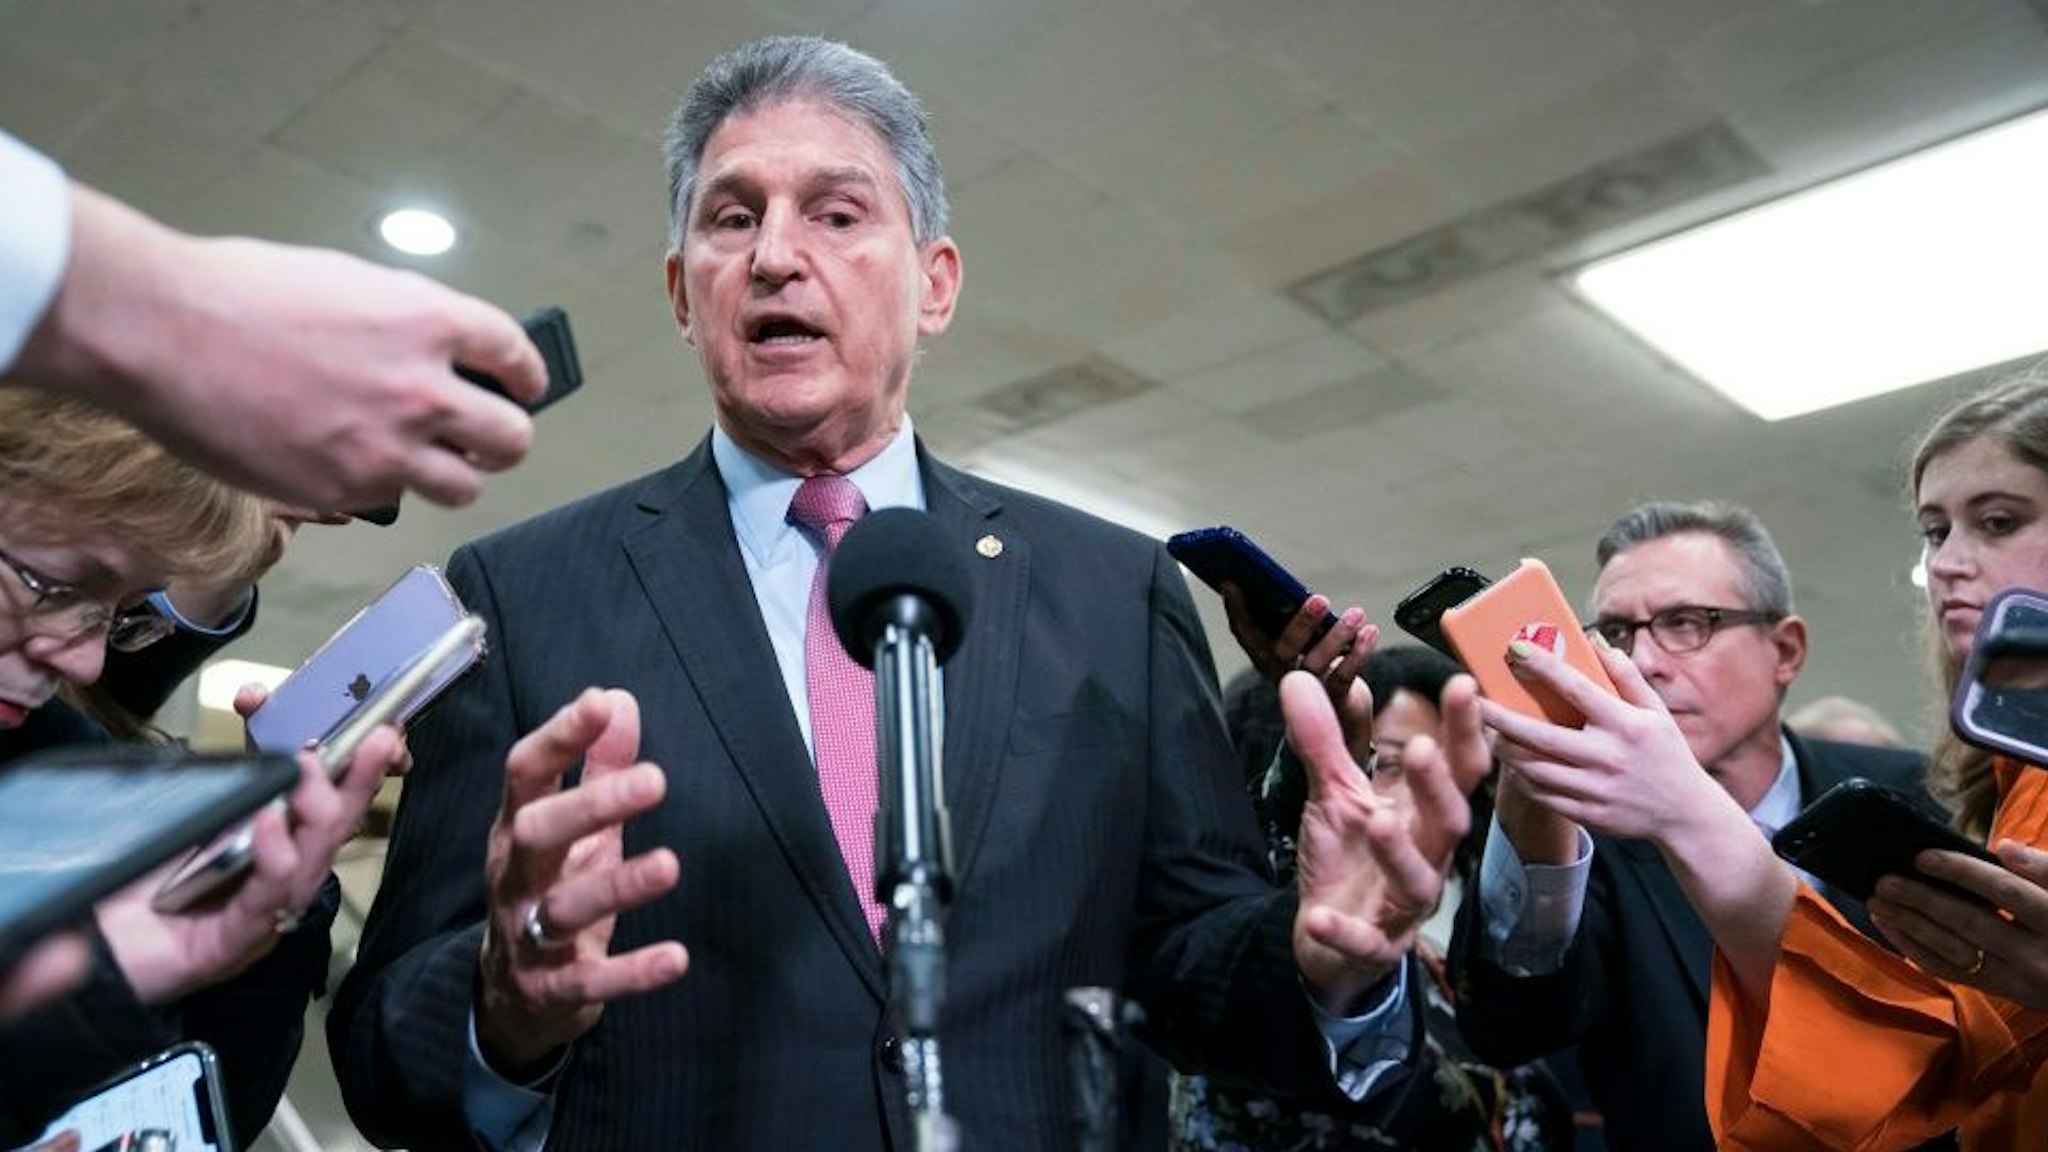 WASHINGTON, DC - FEBRUARY 05: Senator Joe Manchin (D-WV) speaks to the press near the Senate subway following a vote in the Senate impeachment trial that acquitted President Donald Trump of all charges on February 5, 2020 in Washington, DC. After the House impeached Trump last year, the Senate voted today to acquit the President on two articles of impeachment as the trial concludes. (Photo by